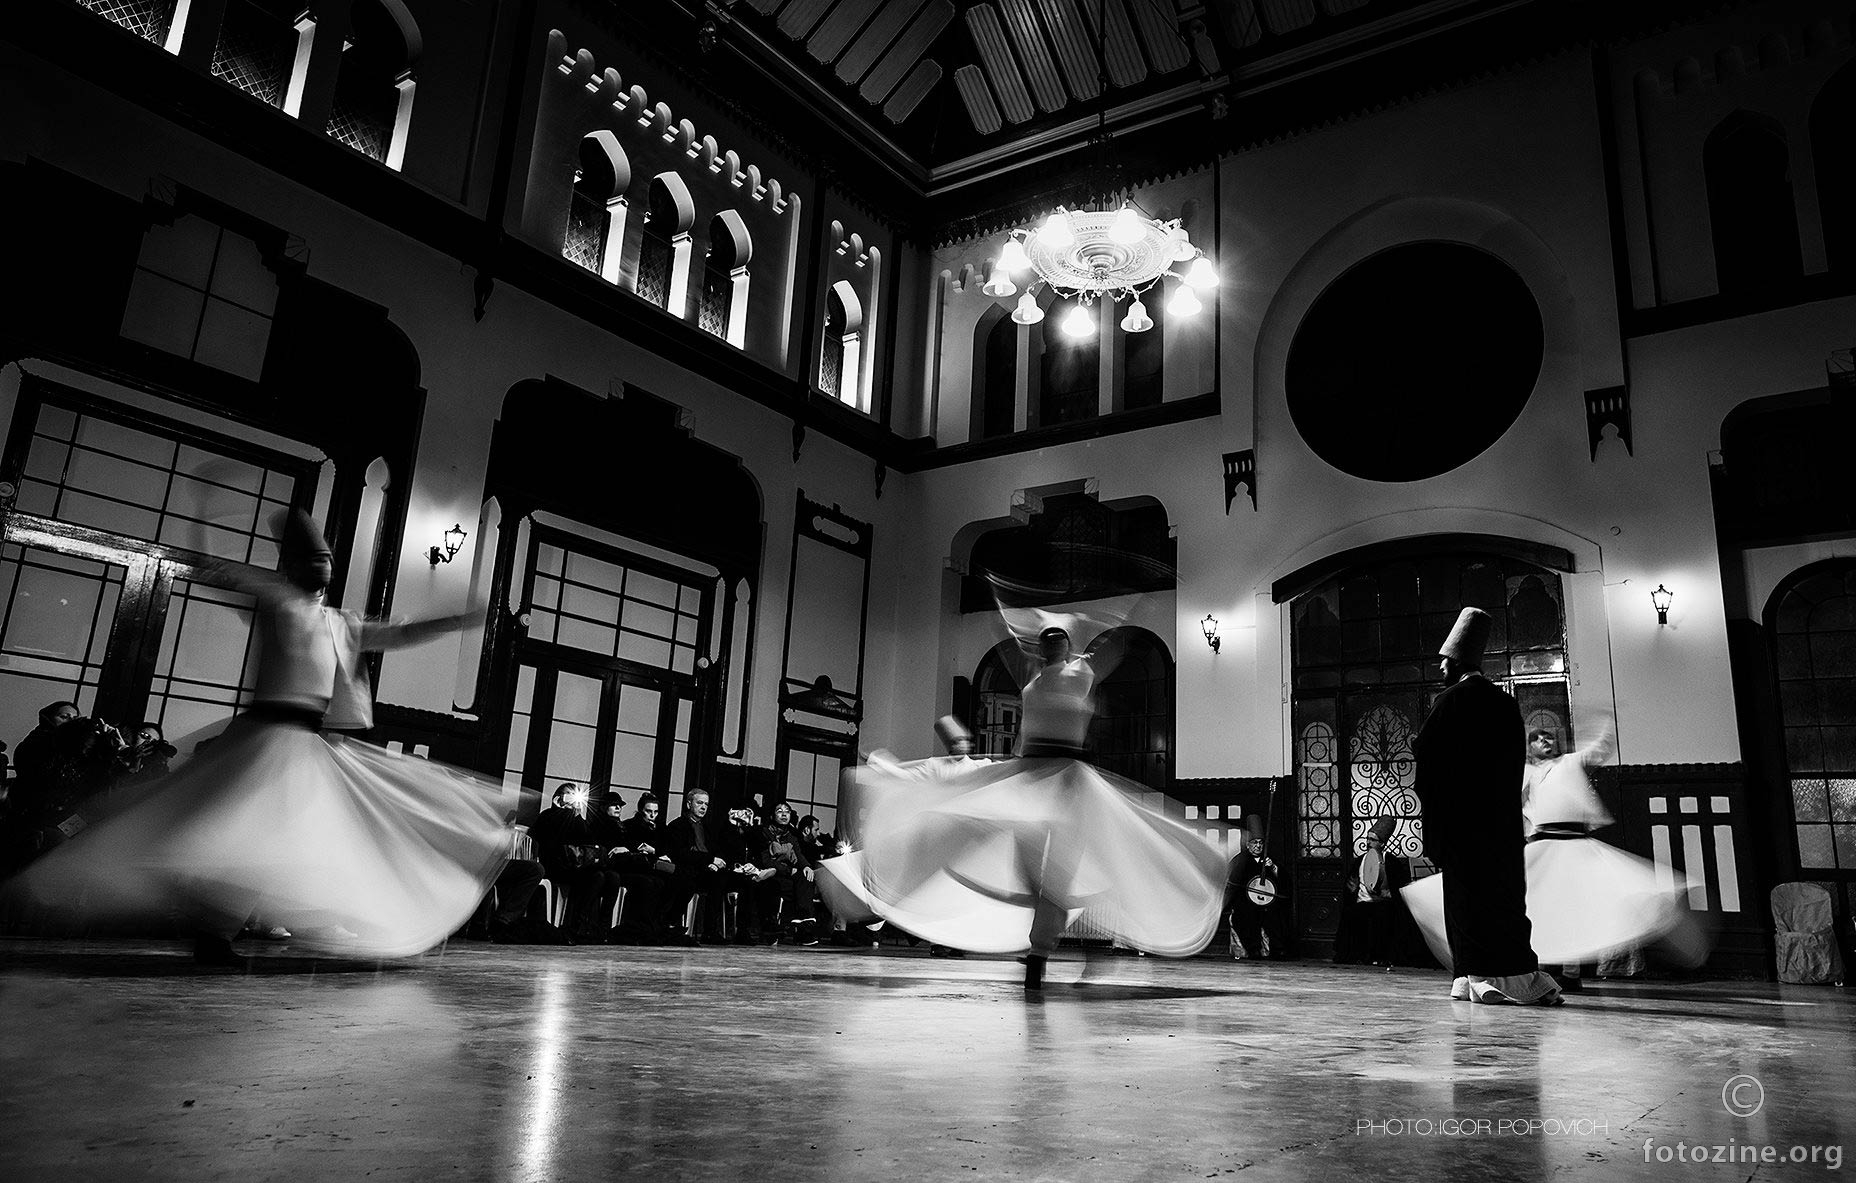 The Dervishes dance